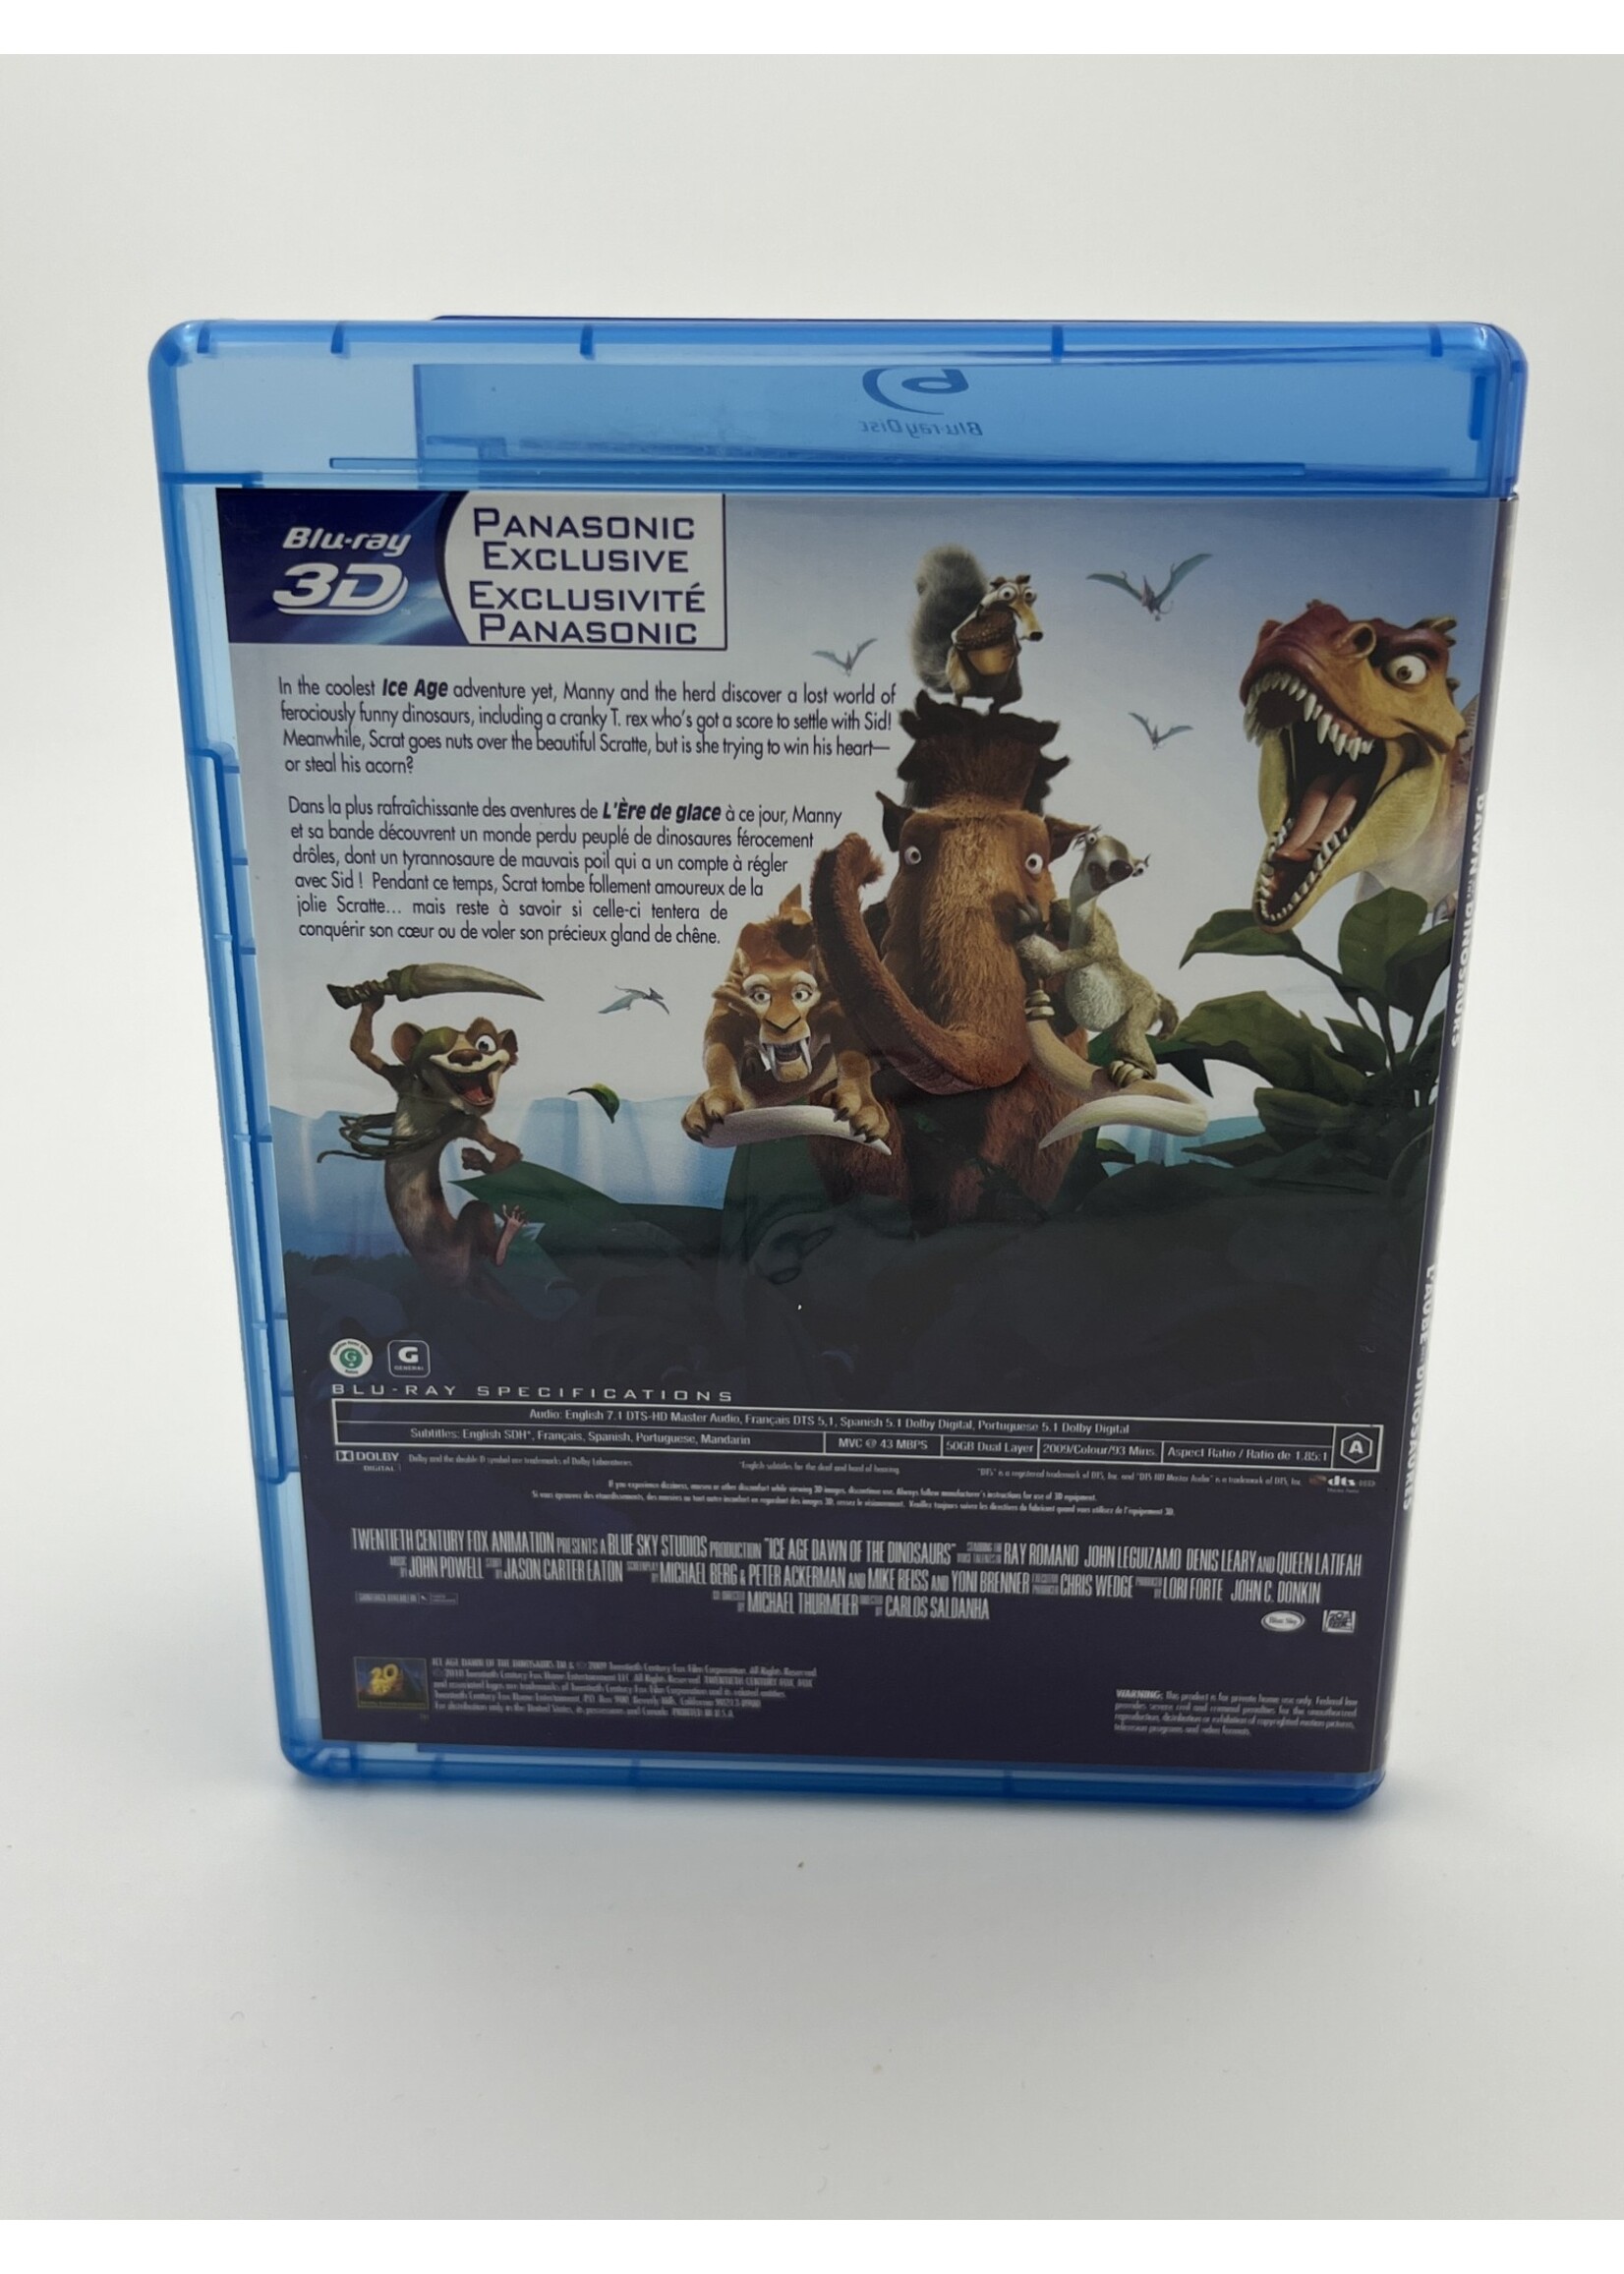 Bluray Ice Age Dawn Of The Dinosaurs 3D Bluray